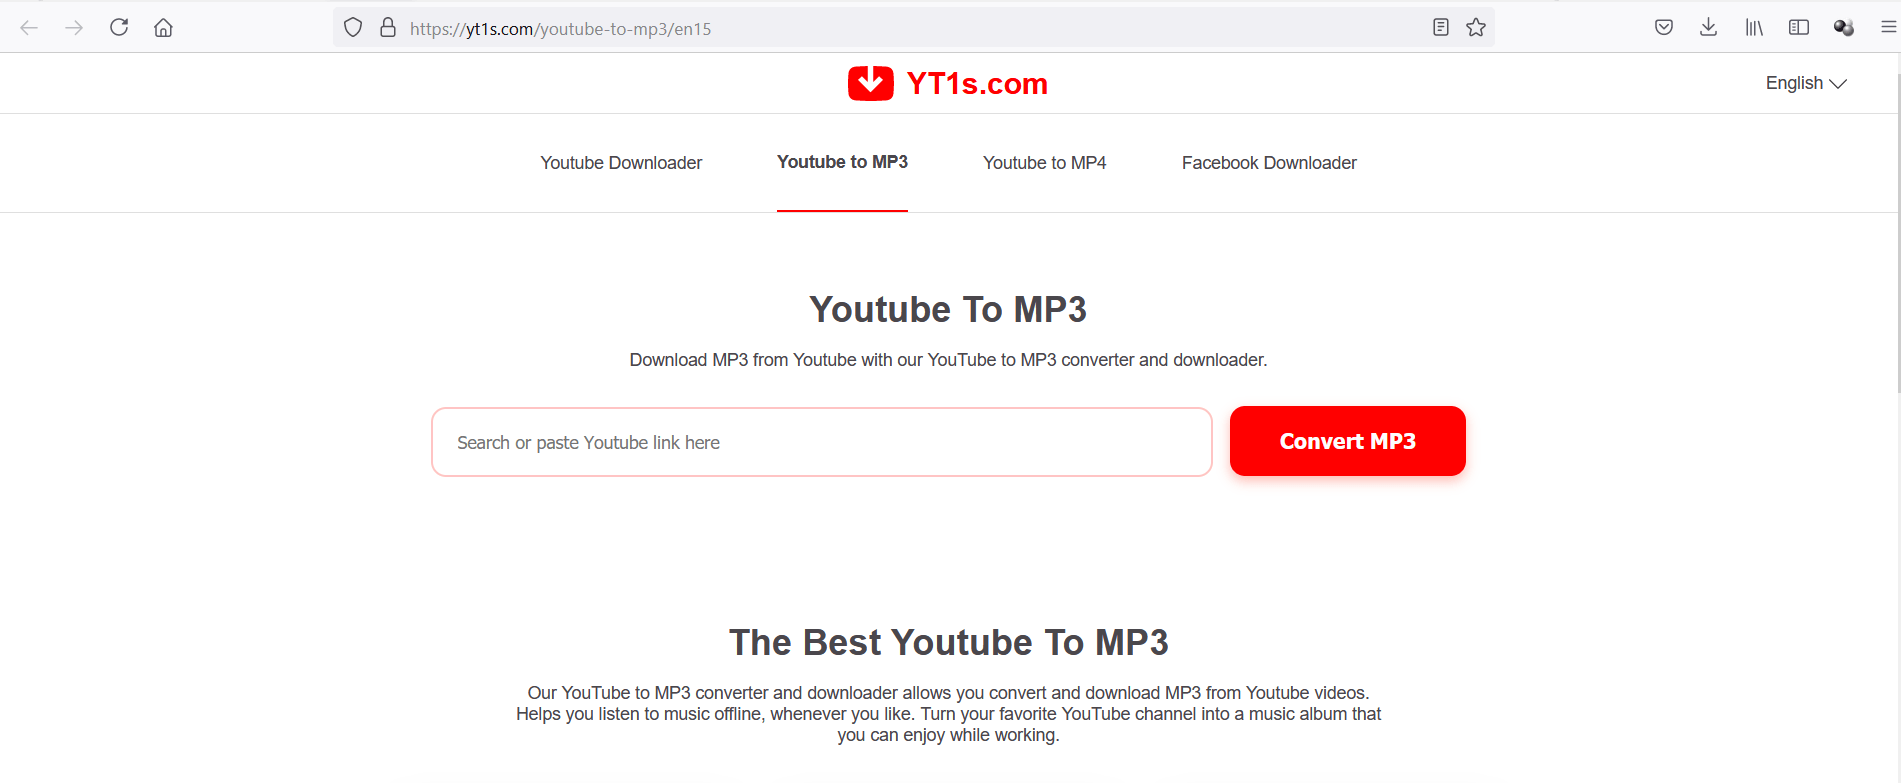 how to download youtube videos to mp3 yt1s